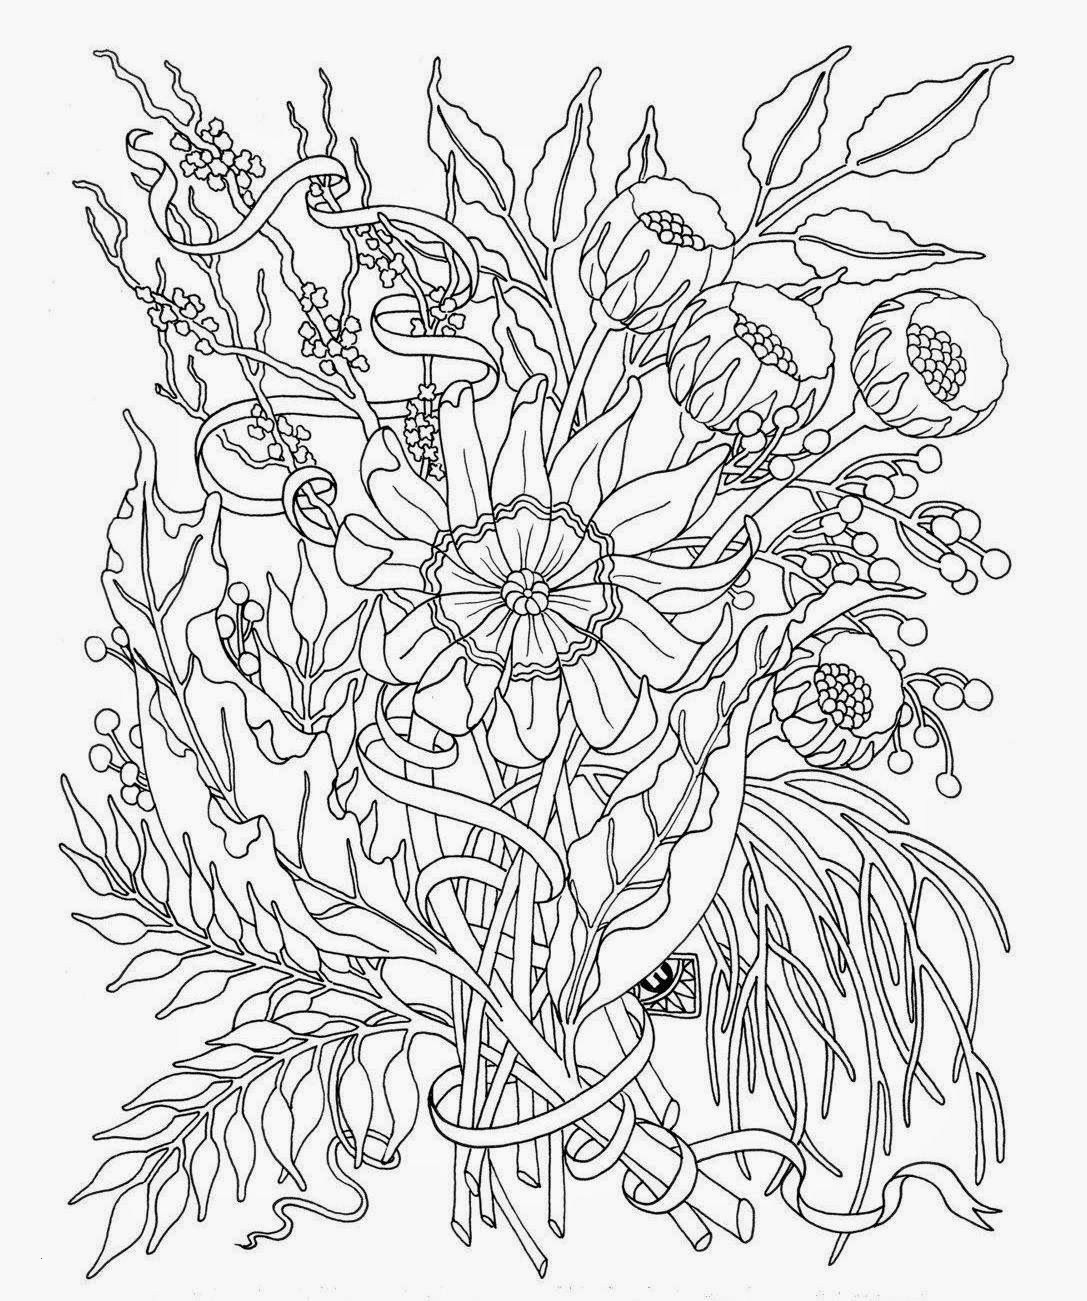 27 Popular Watering Can Flower Vase 2024 free download watering can flower vase of 13 new vase of flowers bogekompresorturkiye com throughout coloring pagesflowers luxury cool vases flower vase coloring page pages flowers in a top i 0d